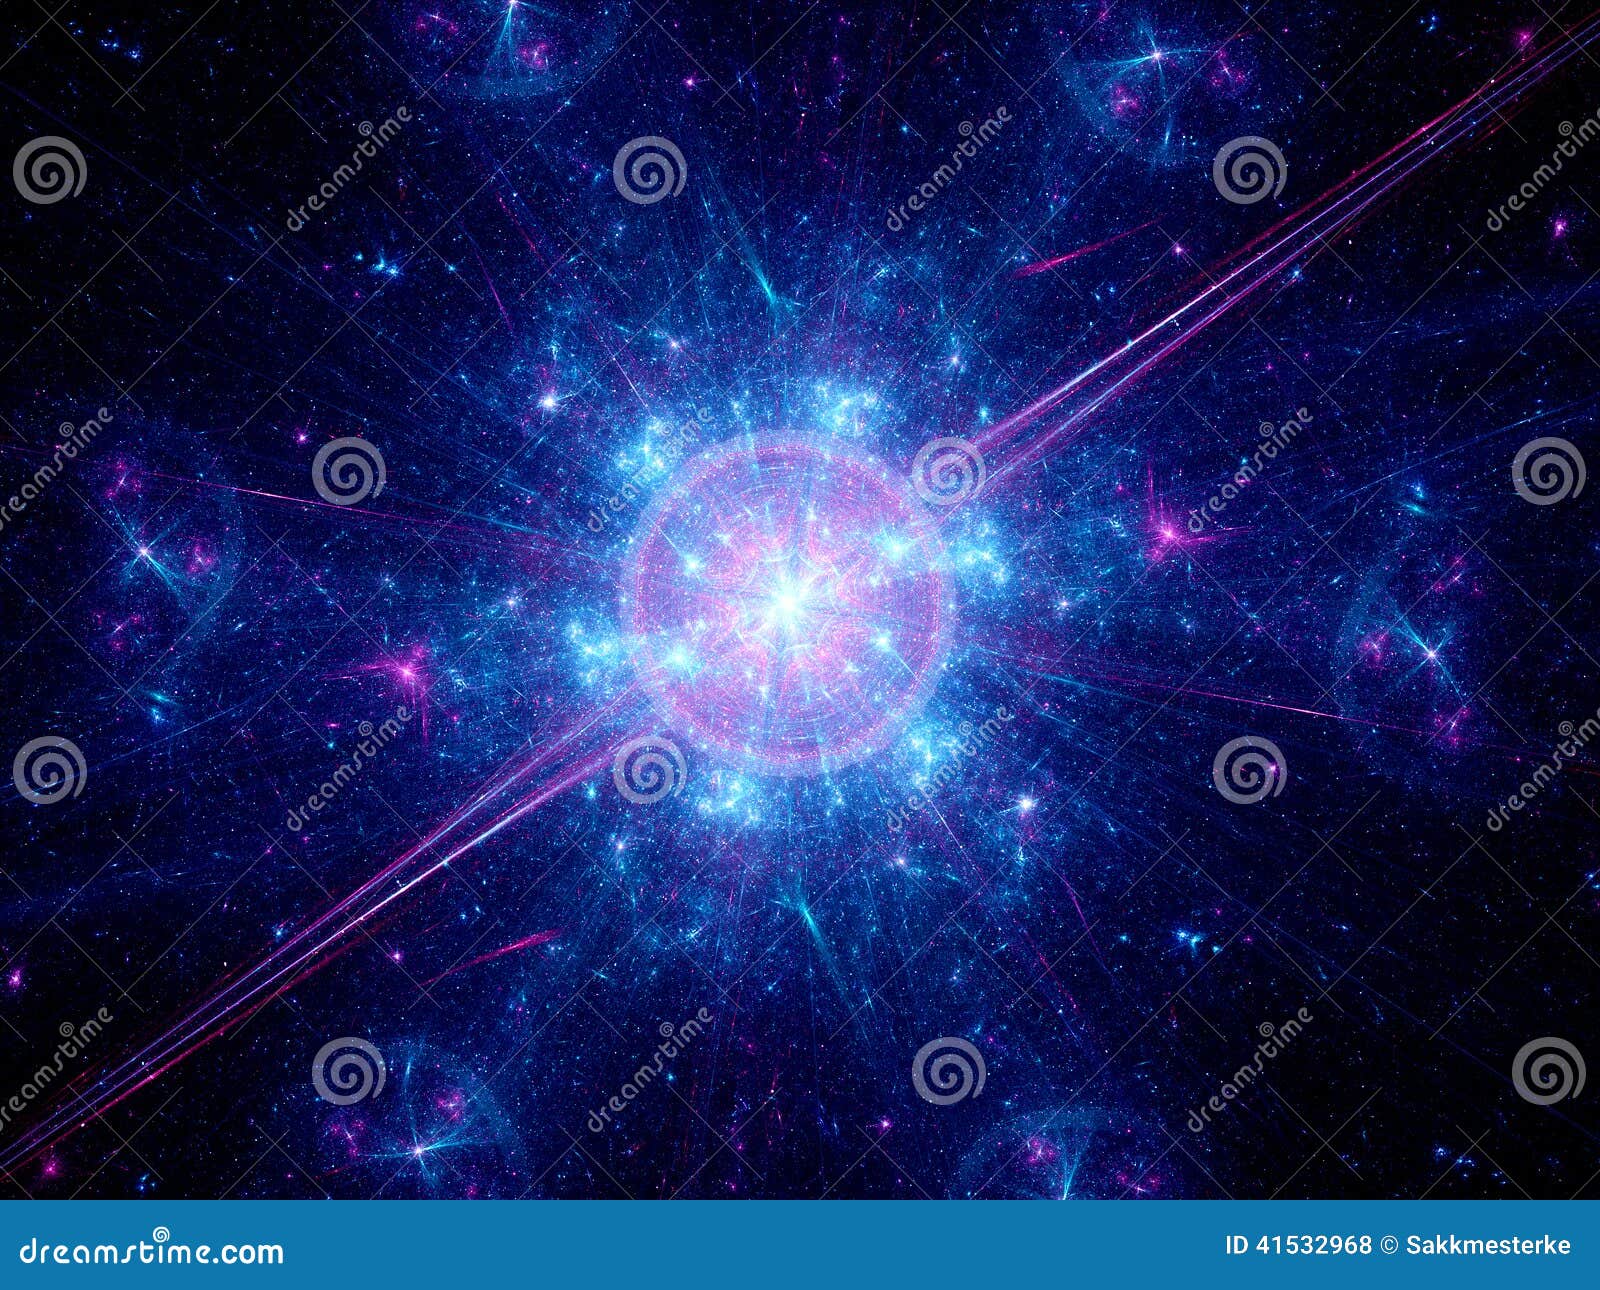 1,274 Big Bang Explosion Universe Stock Photos - Free & Royalty-Free Stock  Photos from Dreamstime